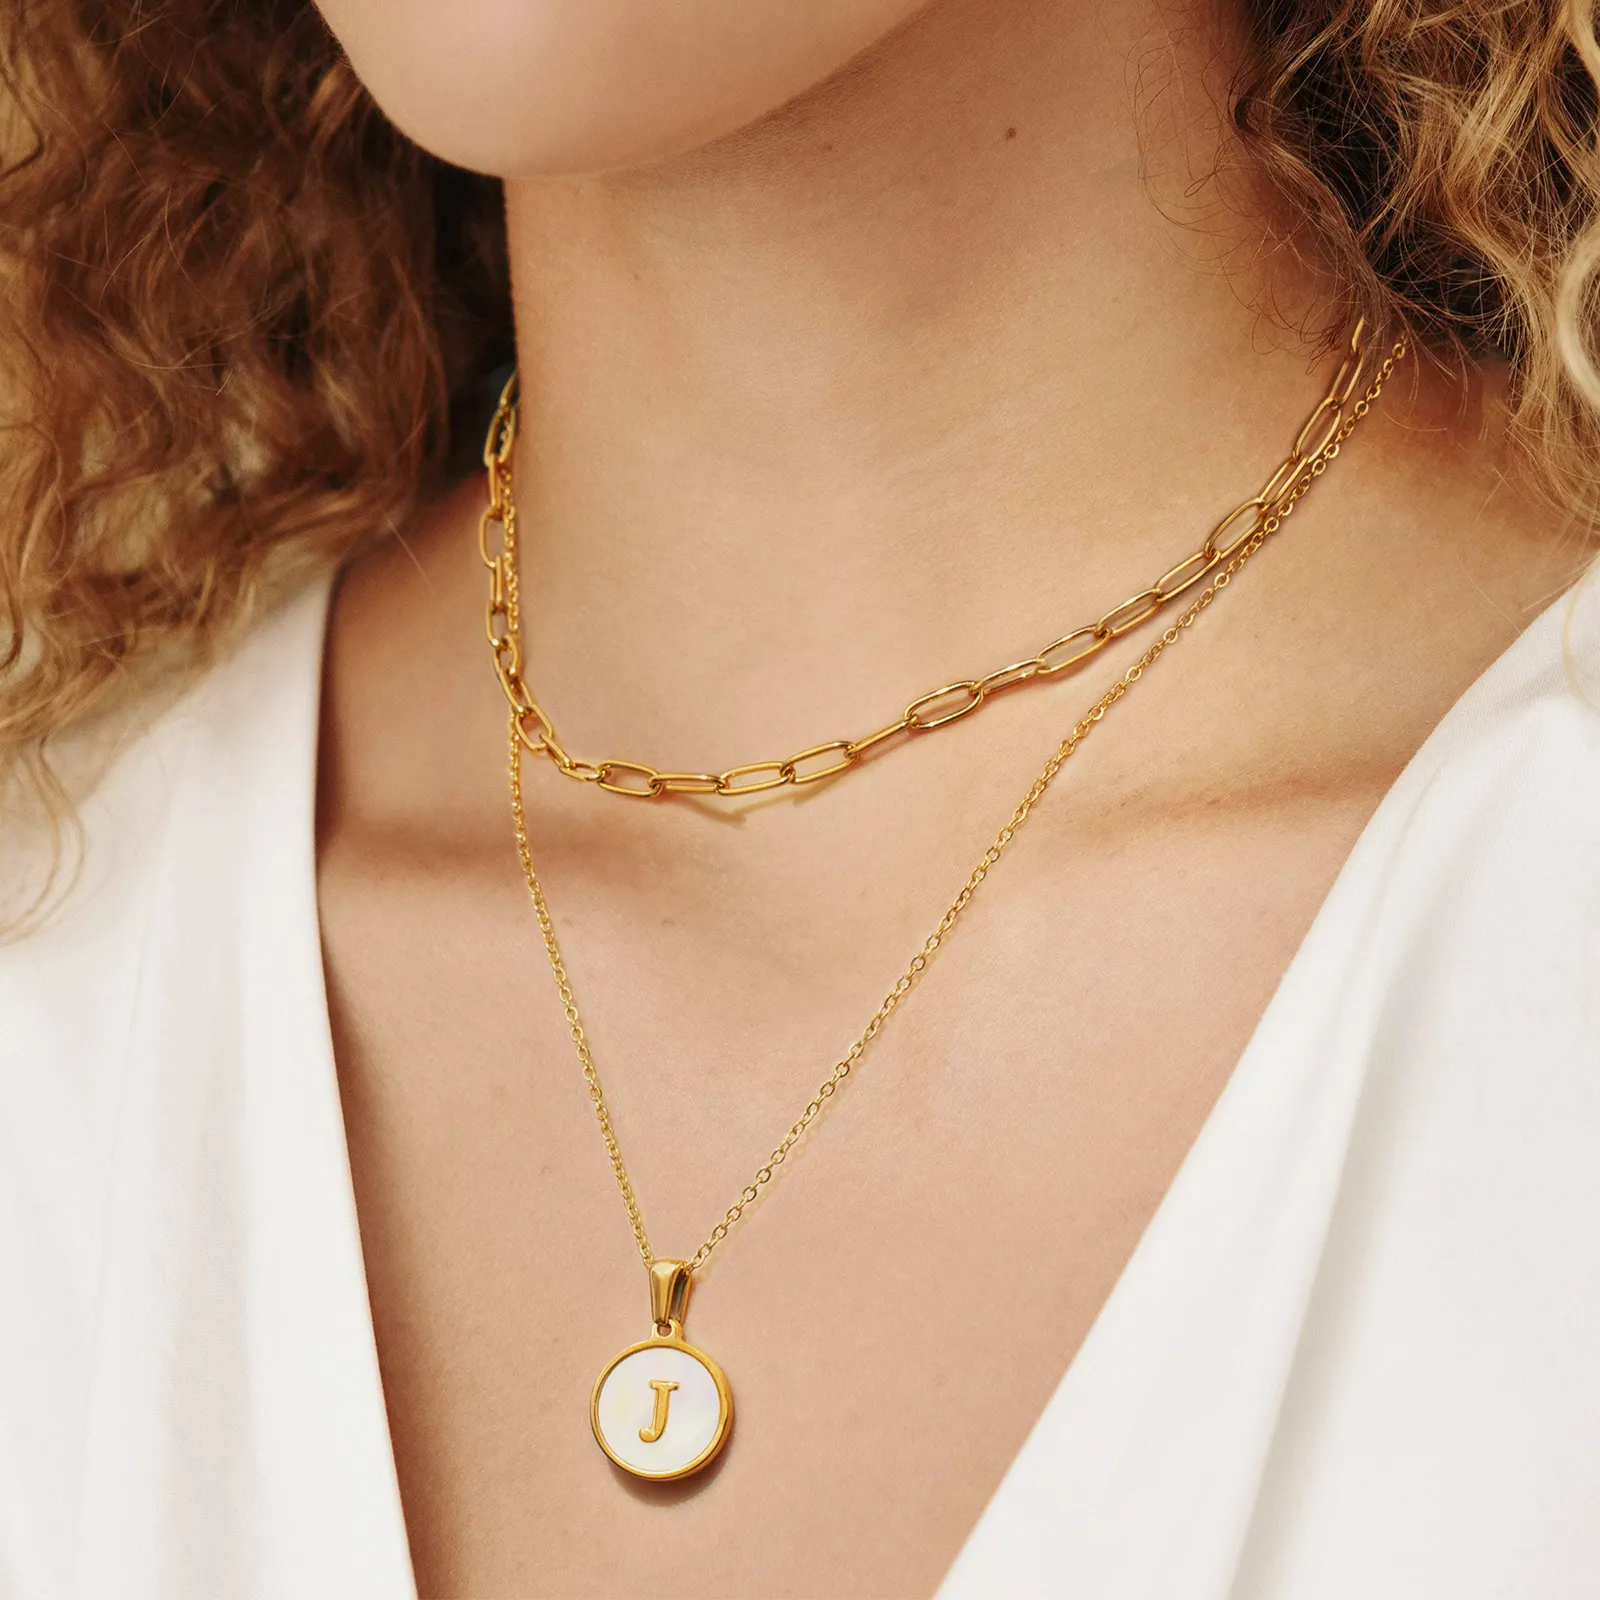 Adjustable Women Choker Coin Necklace Gold Plated Mother of Pearl Pendant Chain Layered Letter Initial Necklace